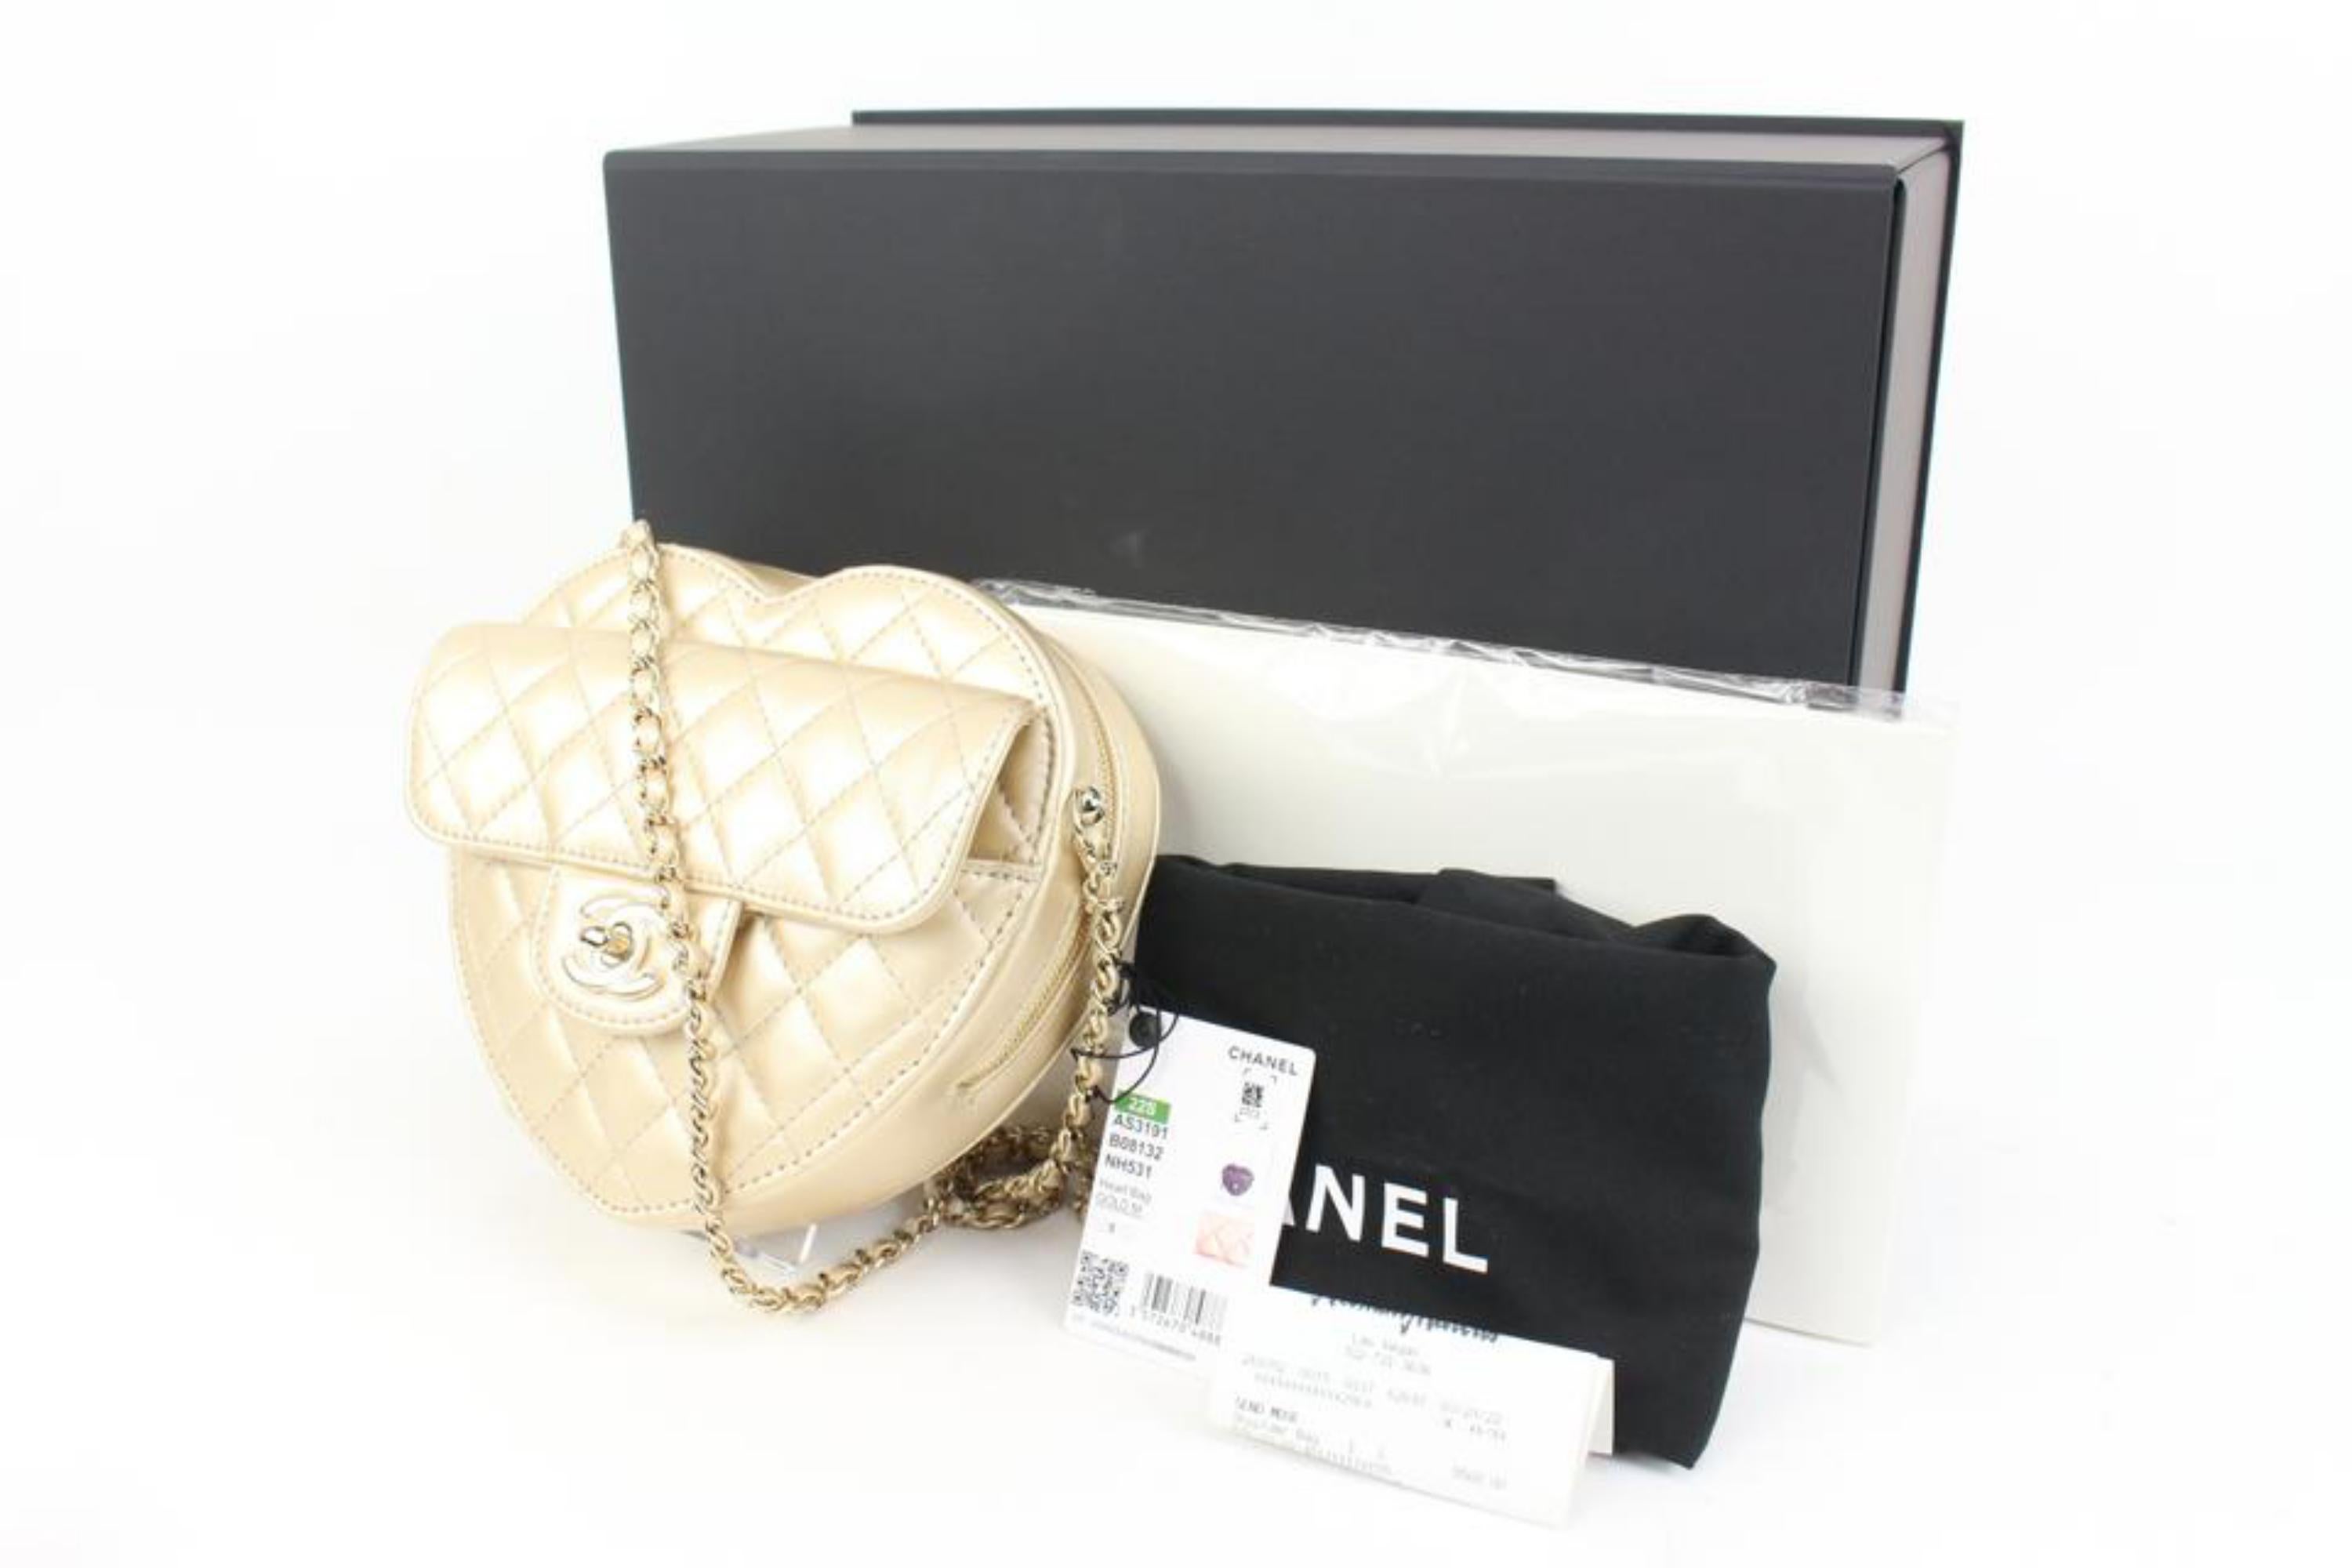 Chanel Gold Quilted Lambskin Large Heart Bag 41ck60
Date Code/Serial Number: J5JC4TLC
Made In: France
Measurements: Length:  7